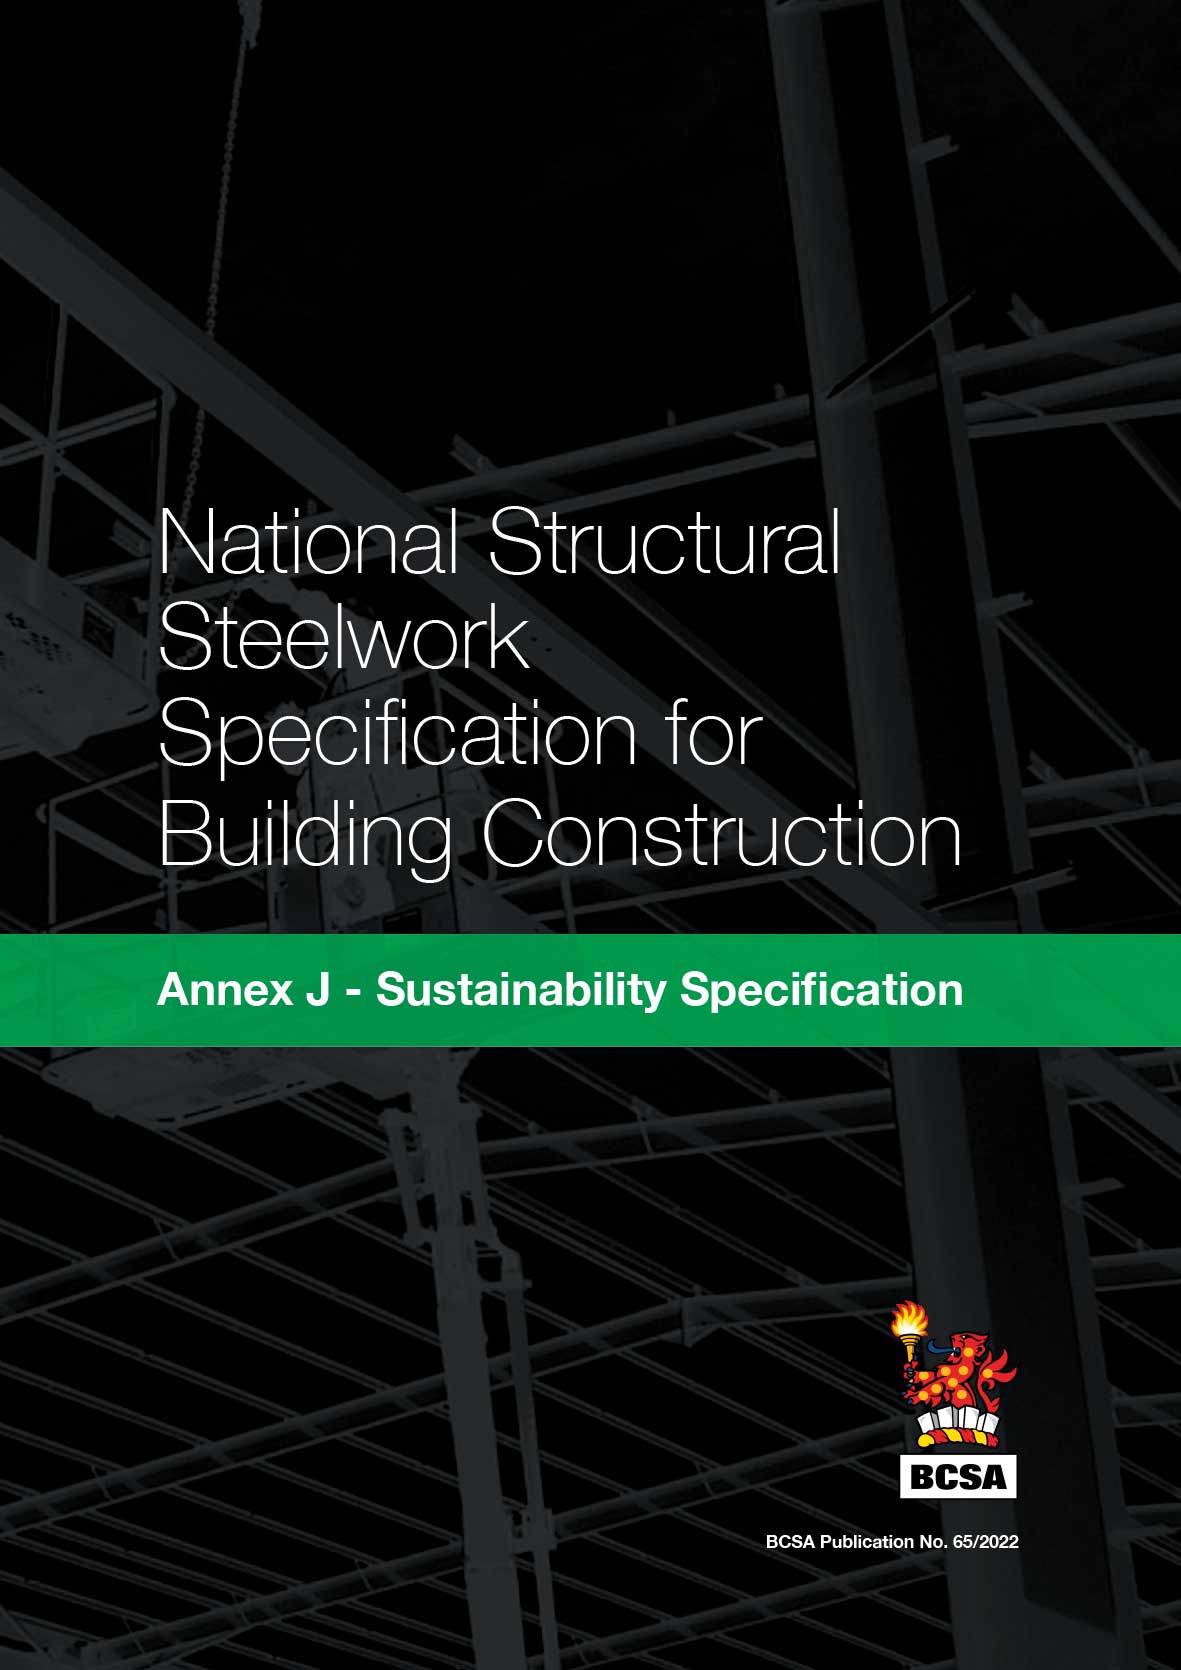 Sustainability Specification for structural steelwork in building construction